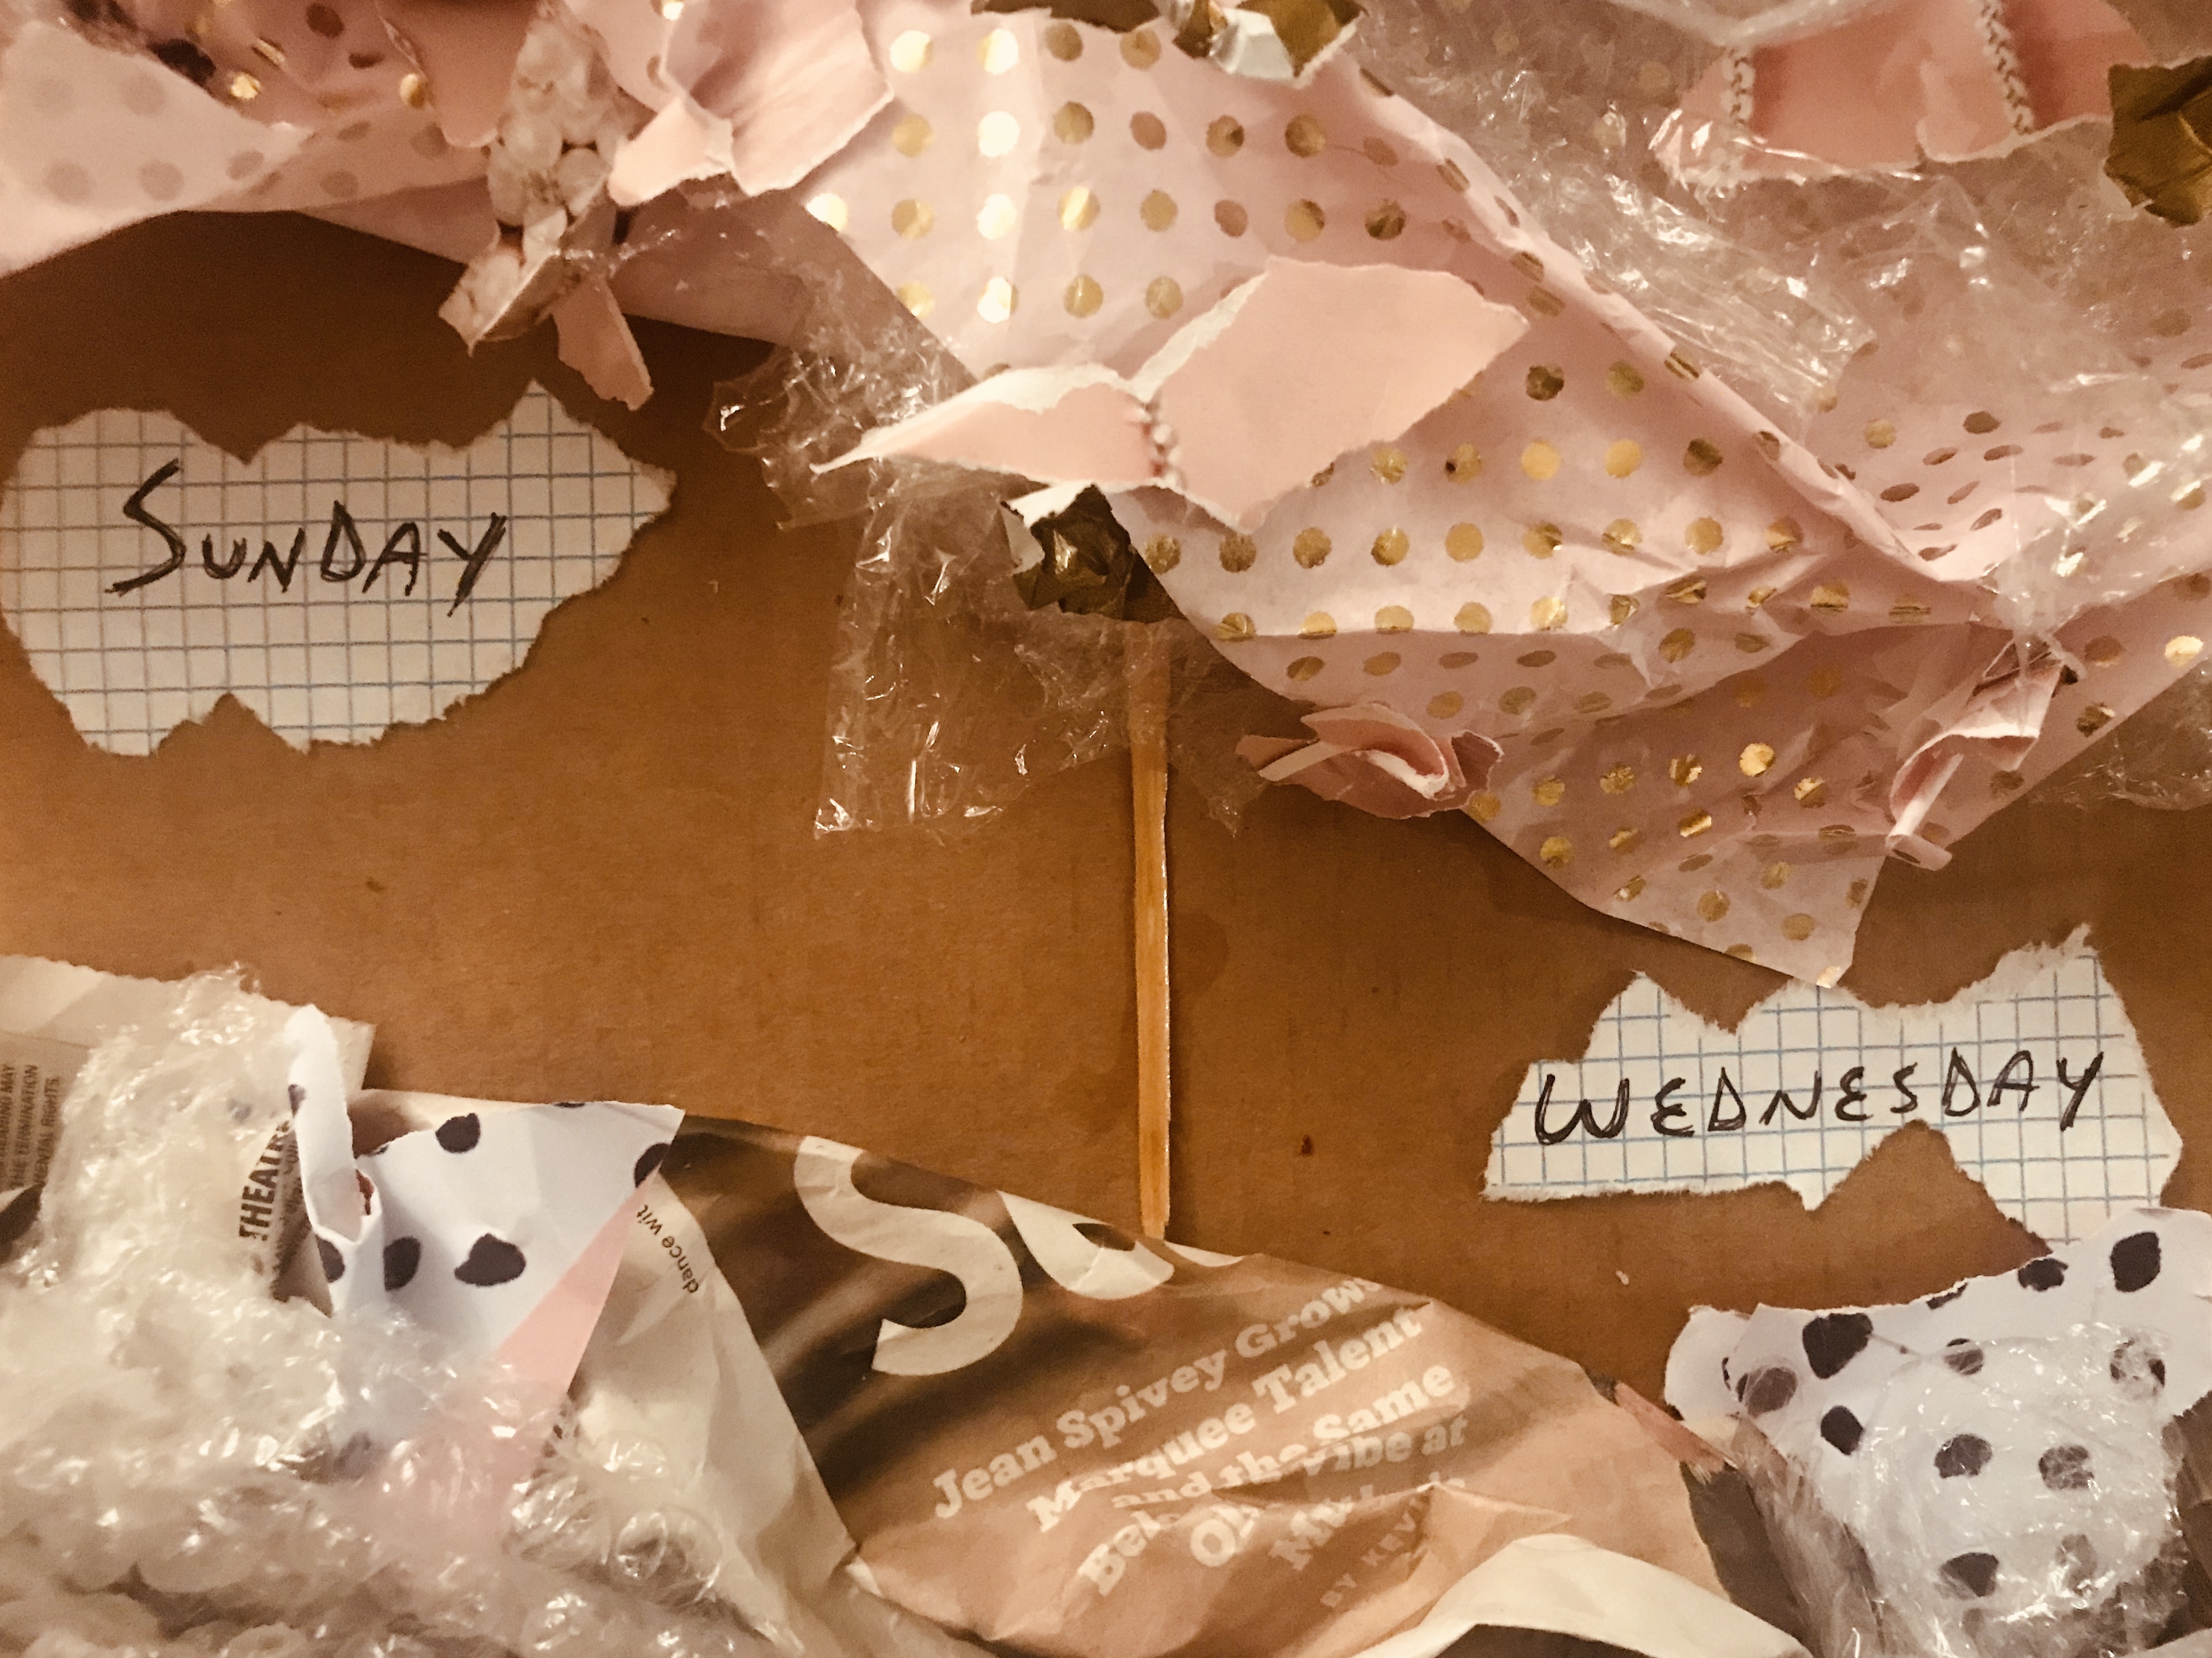 What follows is a series of images wherein a poem is presented handwritten on scraps of graphic paper, against a background of crumpled up newspaper, bubble wrap, and wrapping paper. In the first image, we see the title: Sunday / Wednesday.